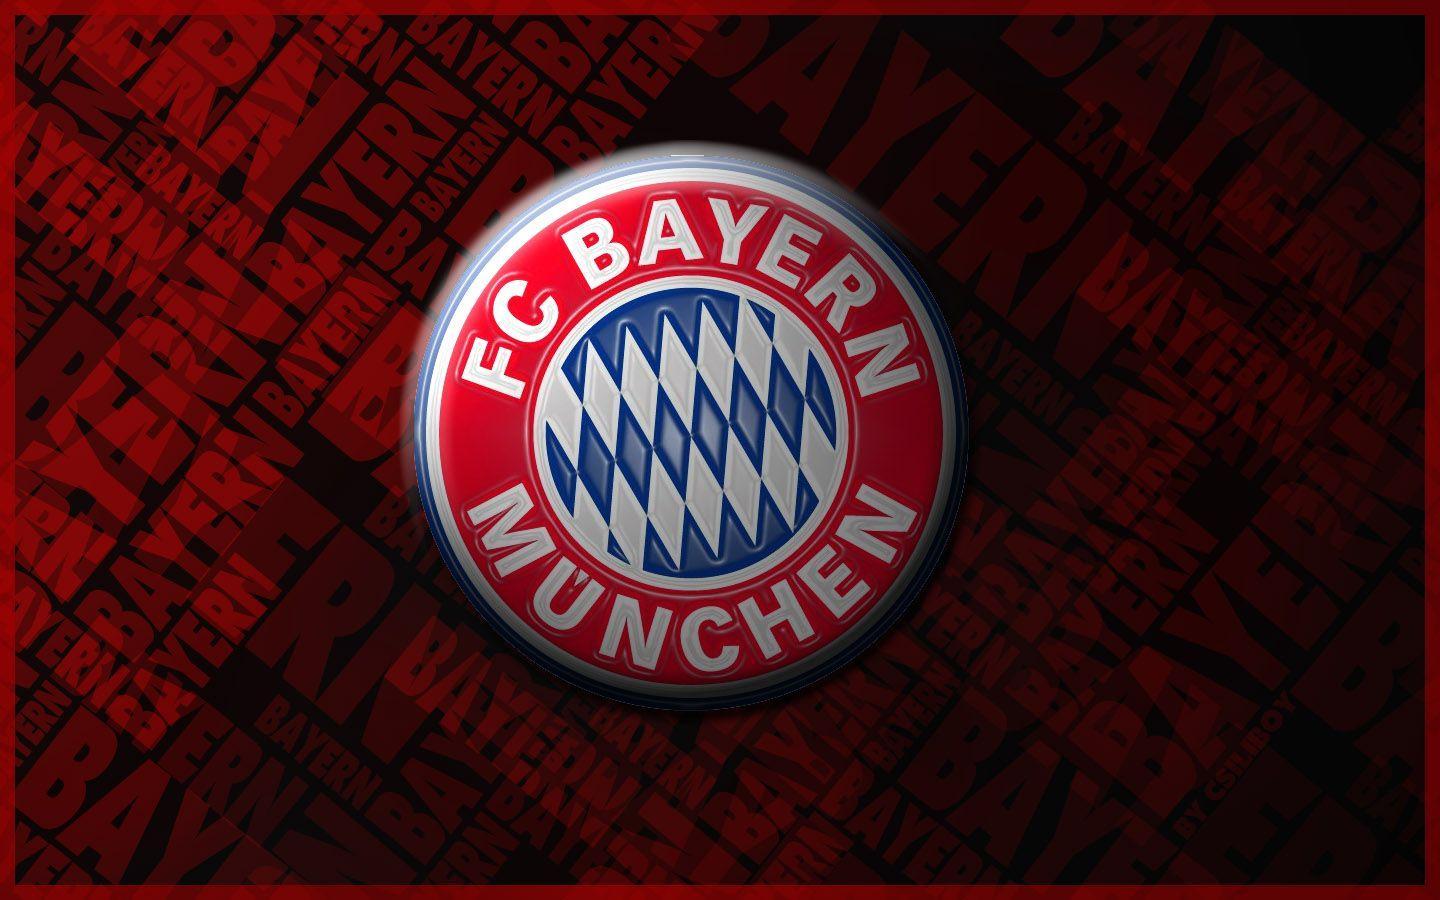 Bayern Munchen HD Wallpapers for Desktop, iPhone, iPad, and Android